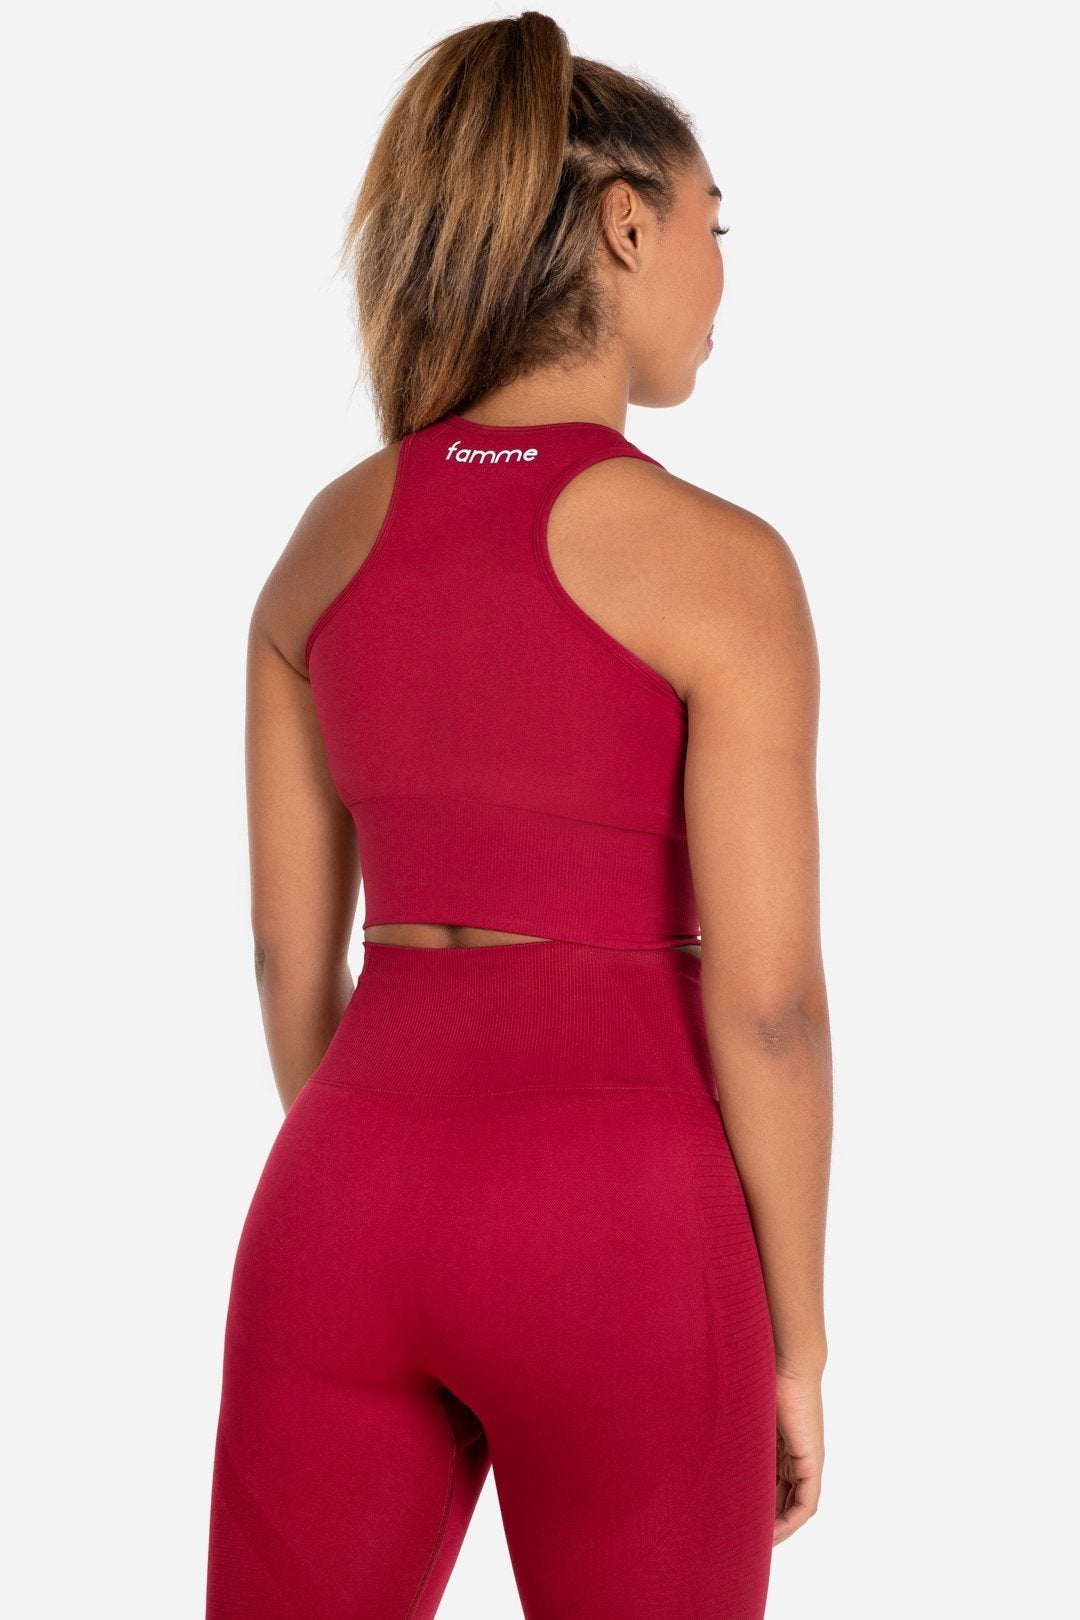 Red Elevate Crop Top - for dame - Famme - Sports Bra